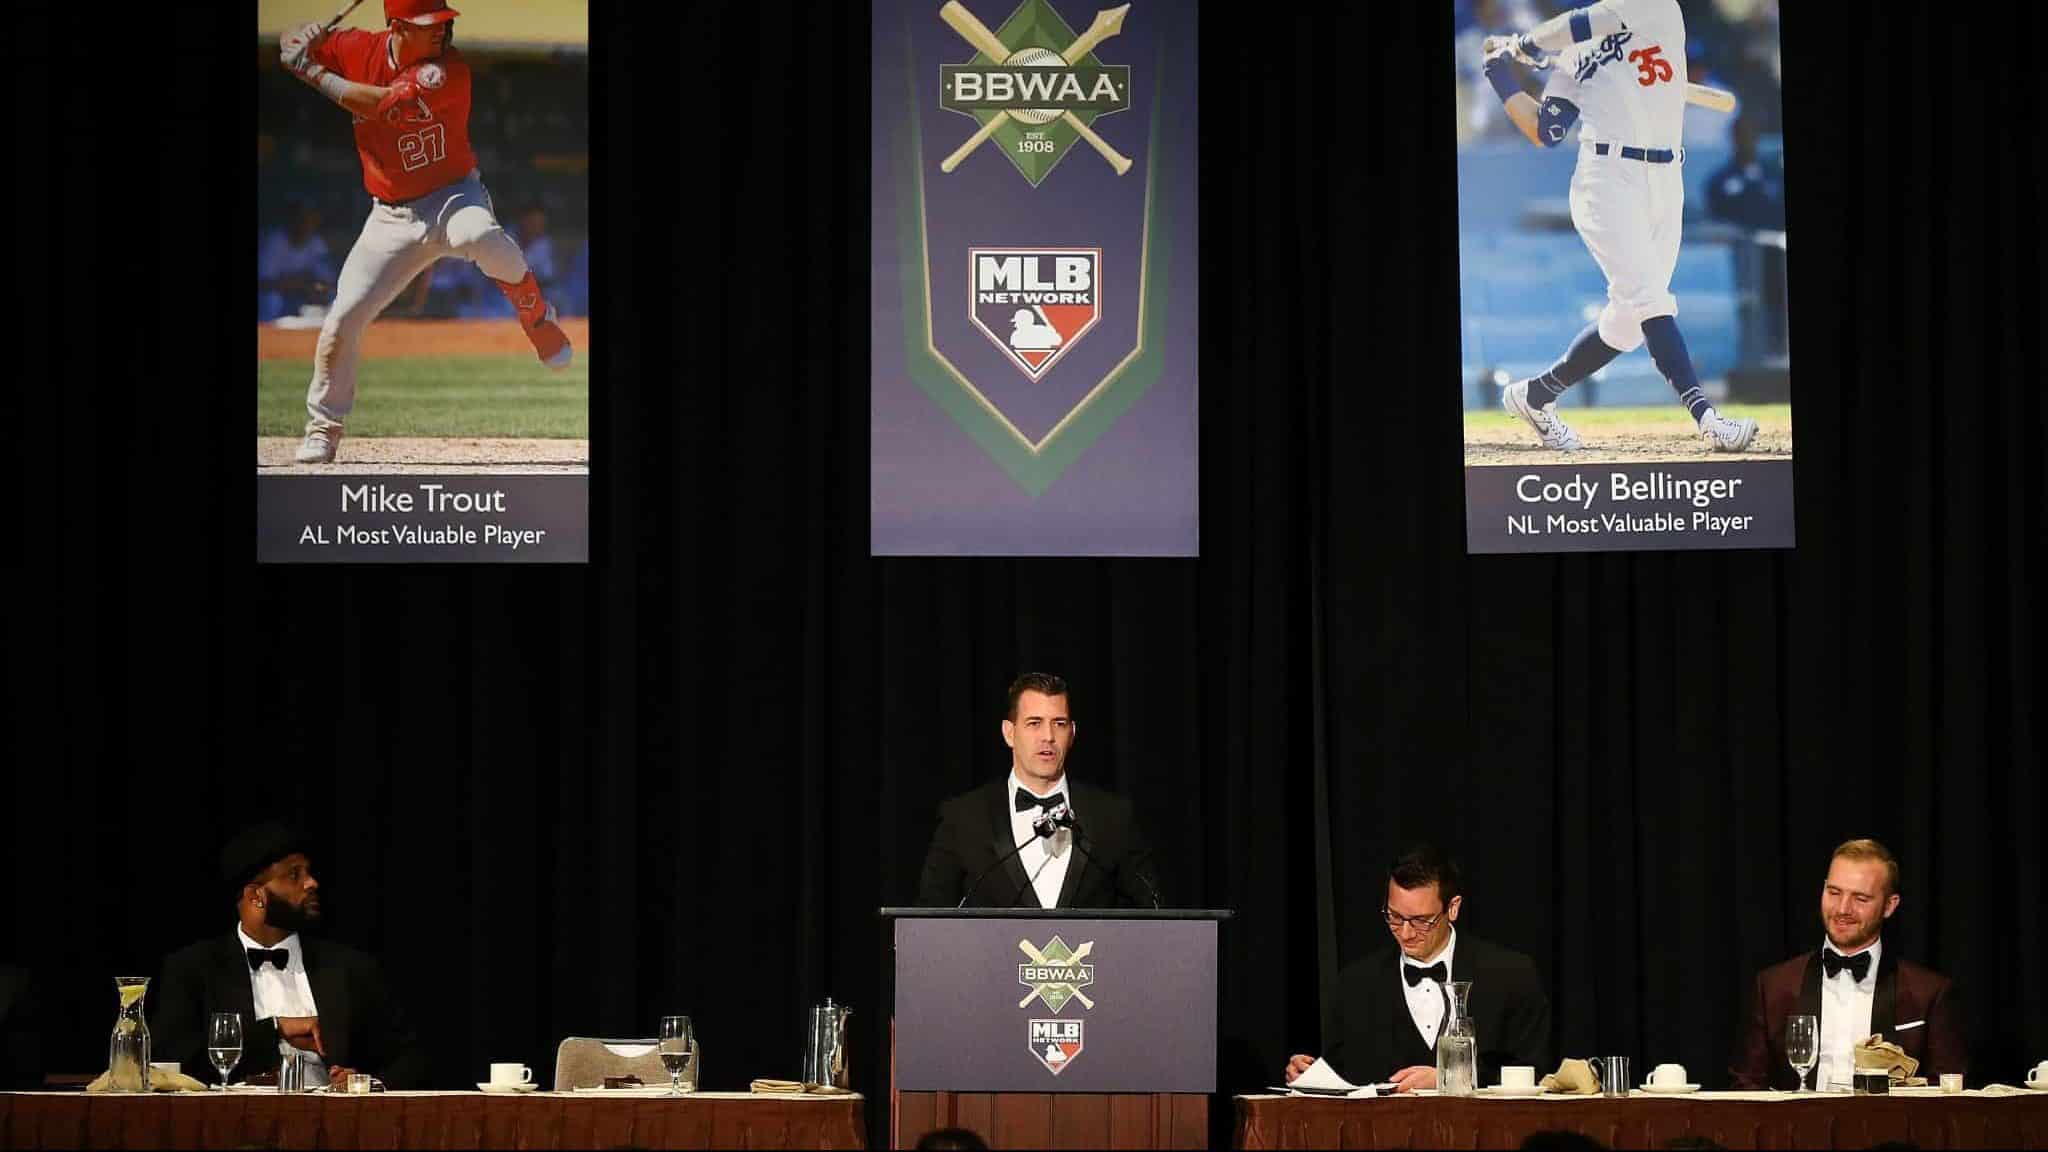 NEW YORK, NEW YORK - JANUARY 25: General Manager Brodie Van Wagenen of the New York Mets speaks during the 97th annual New York Baseball Writers' Dinner on January 25, 2020 Sheraton New York in New York City.